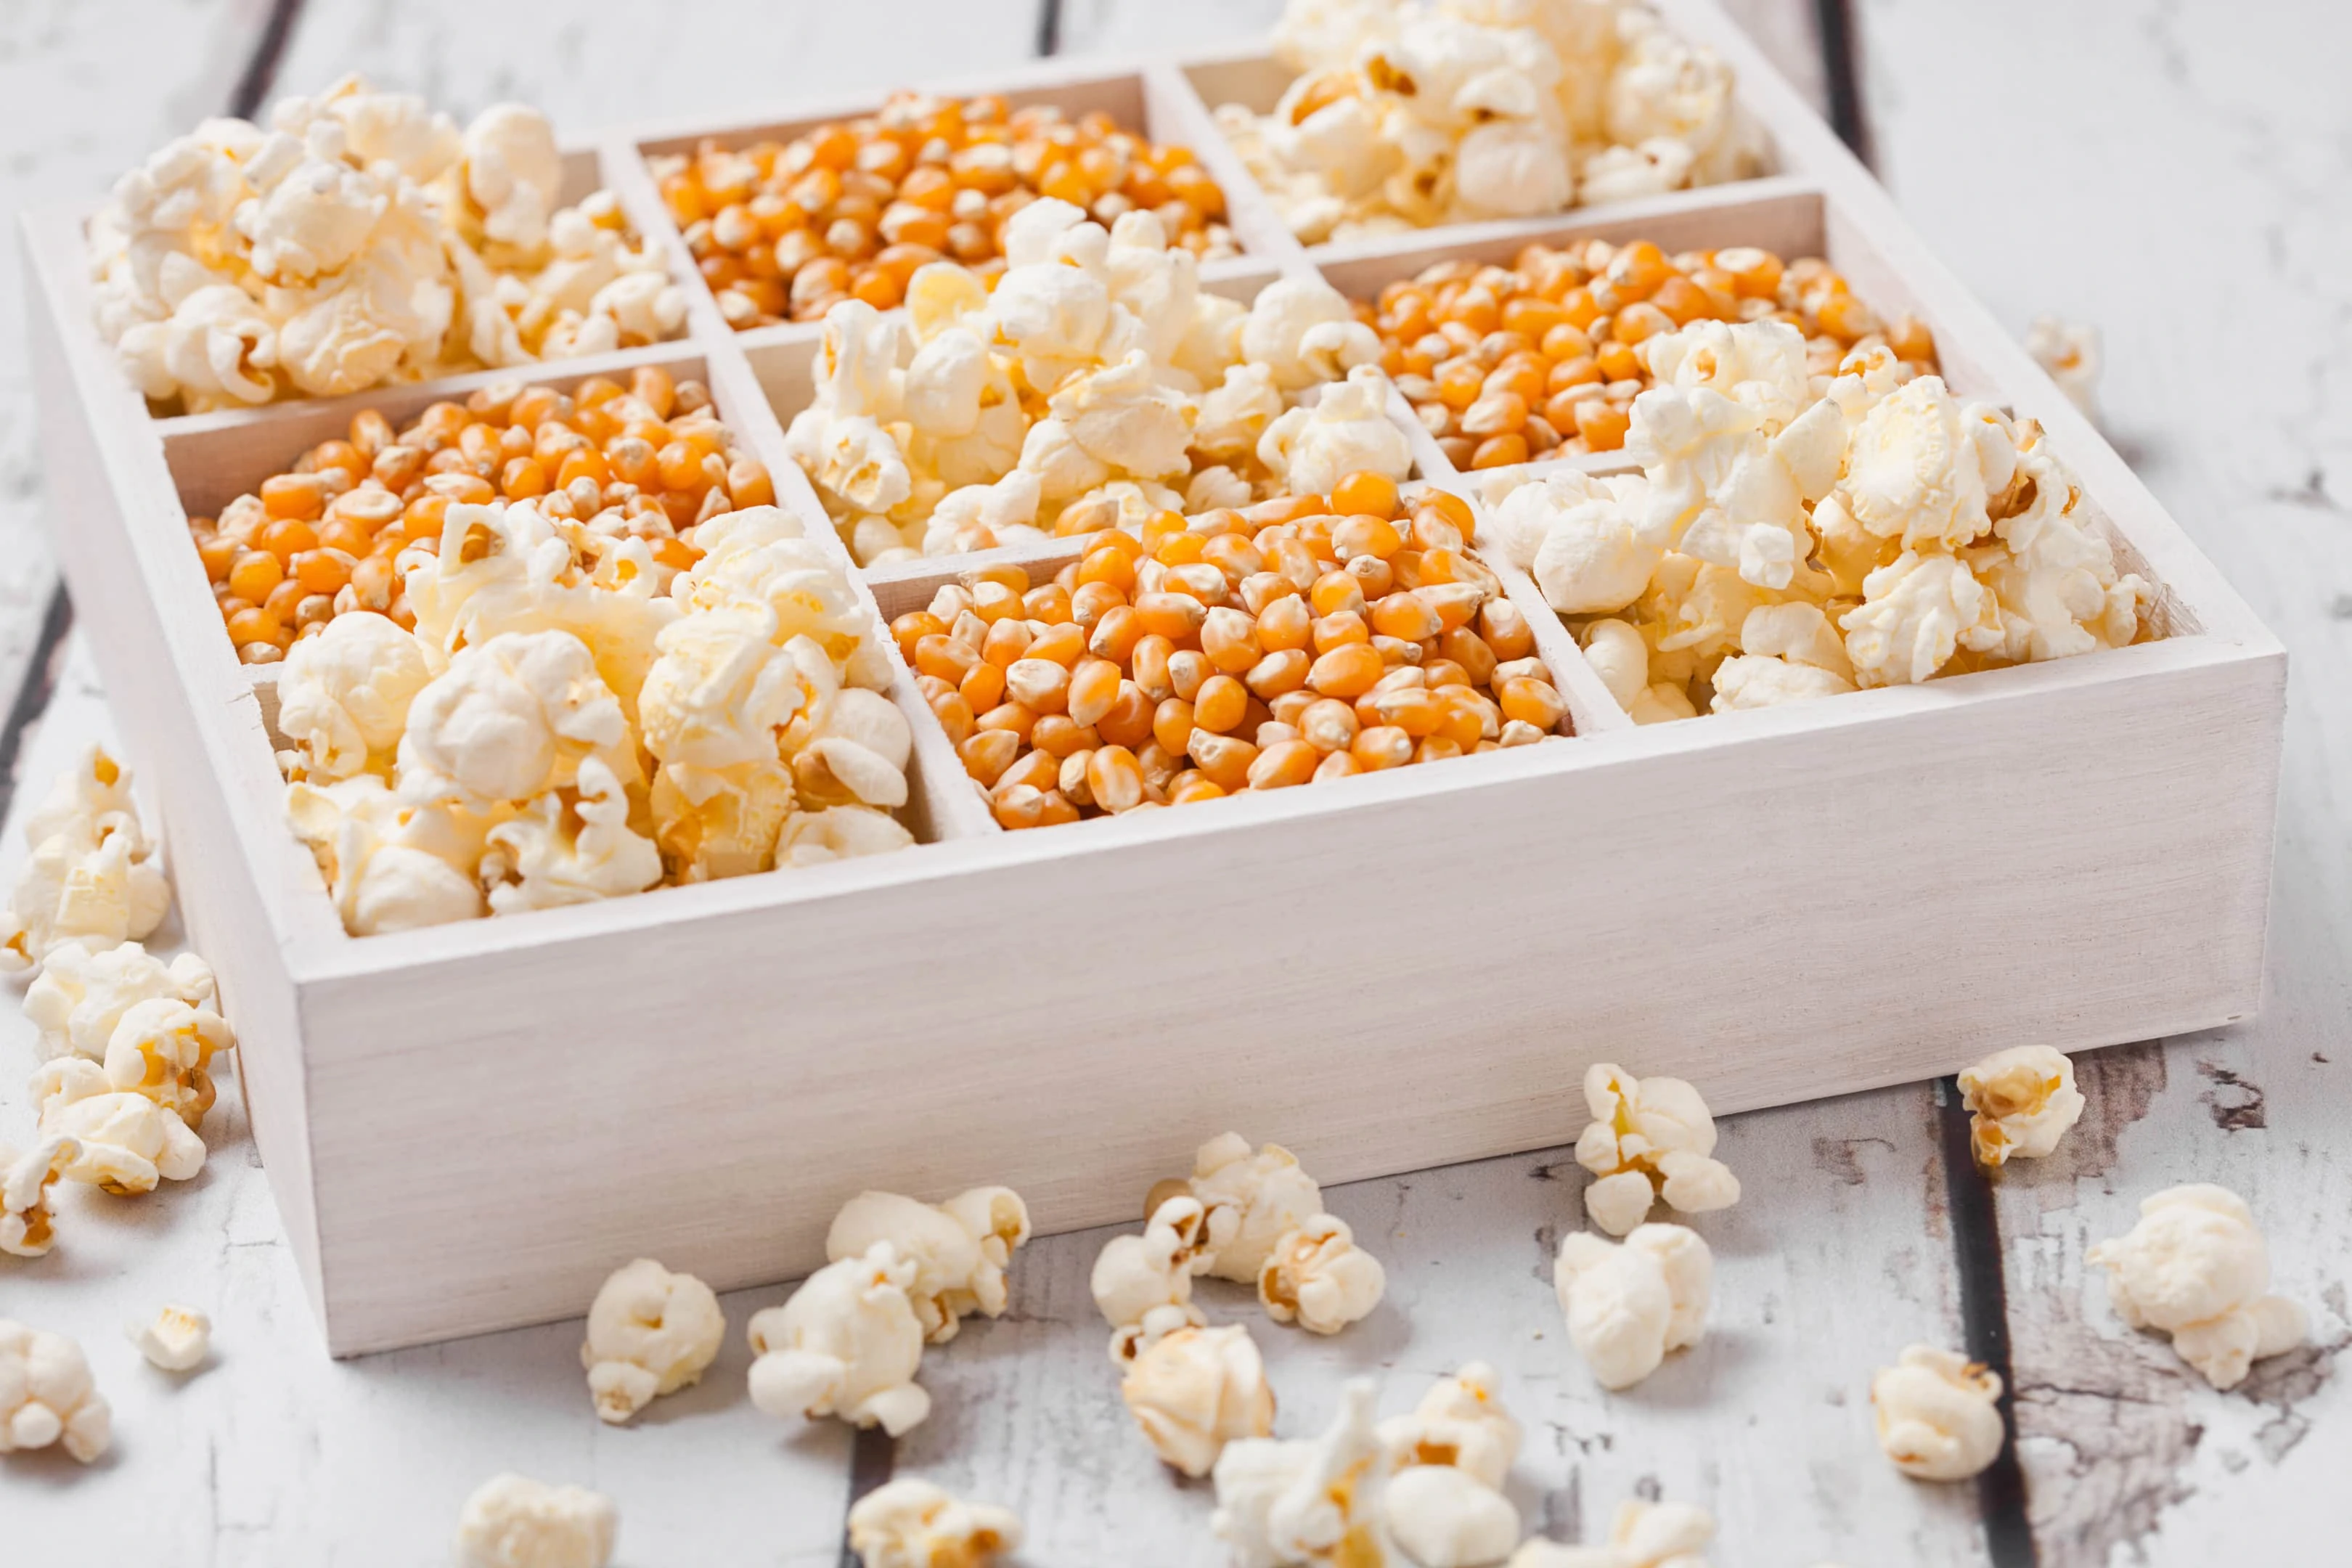 Raw corn seeds and popcorn in white wooden box